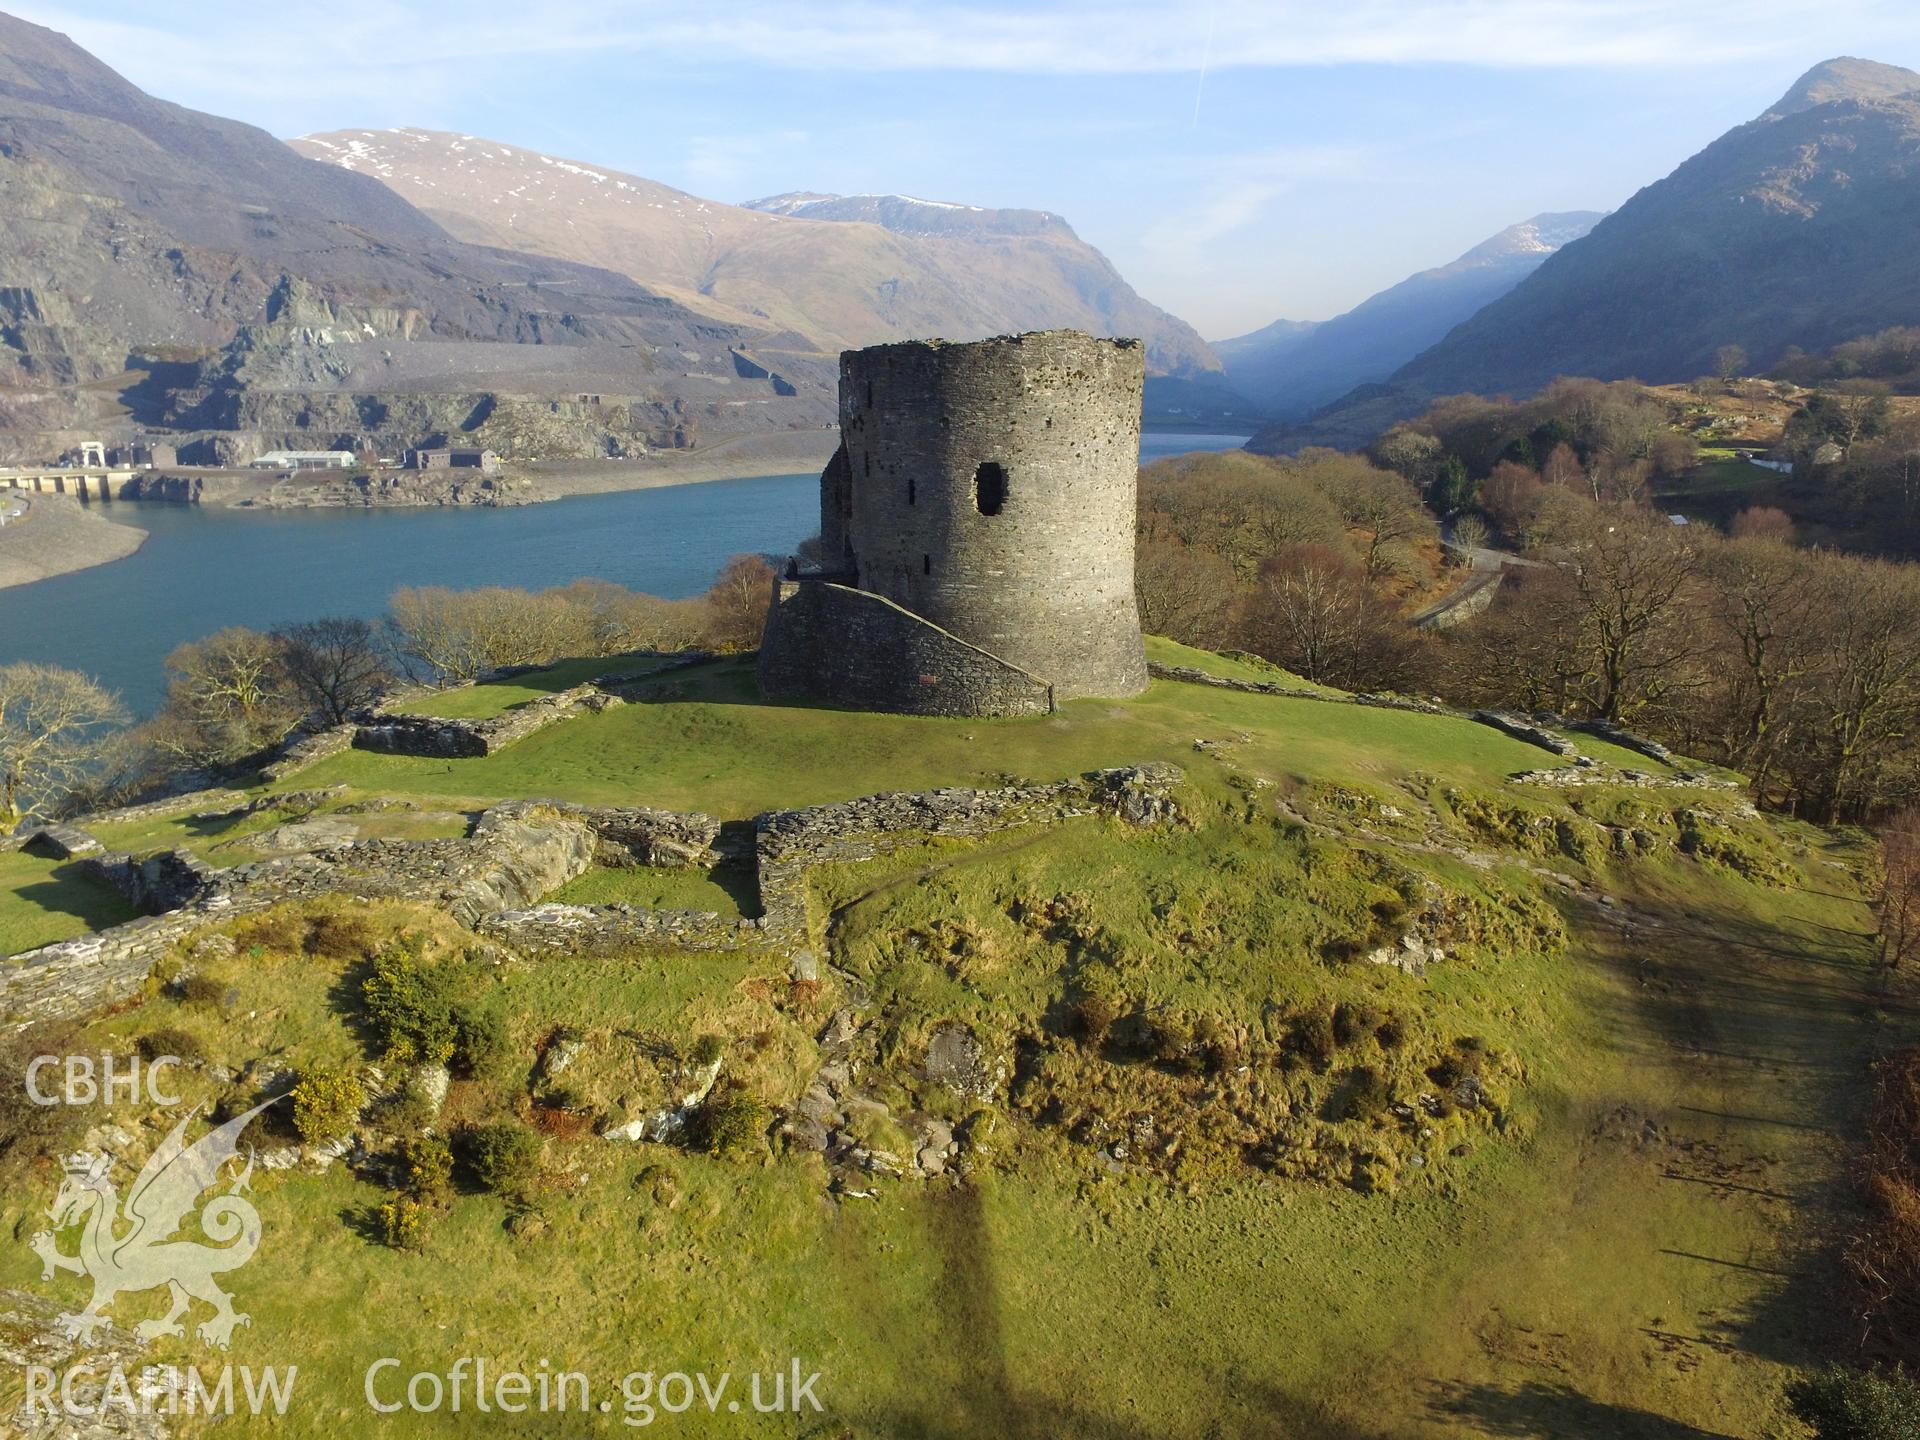 Colour photo showing view of Dolbadarn Castle, taken by Paul R. Davis, 9th March 2018.